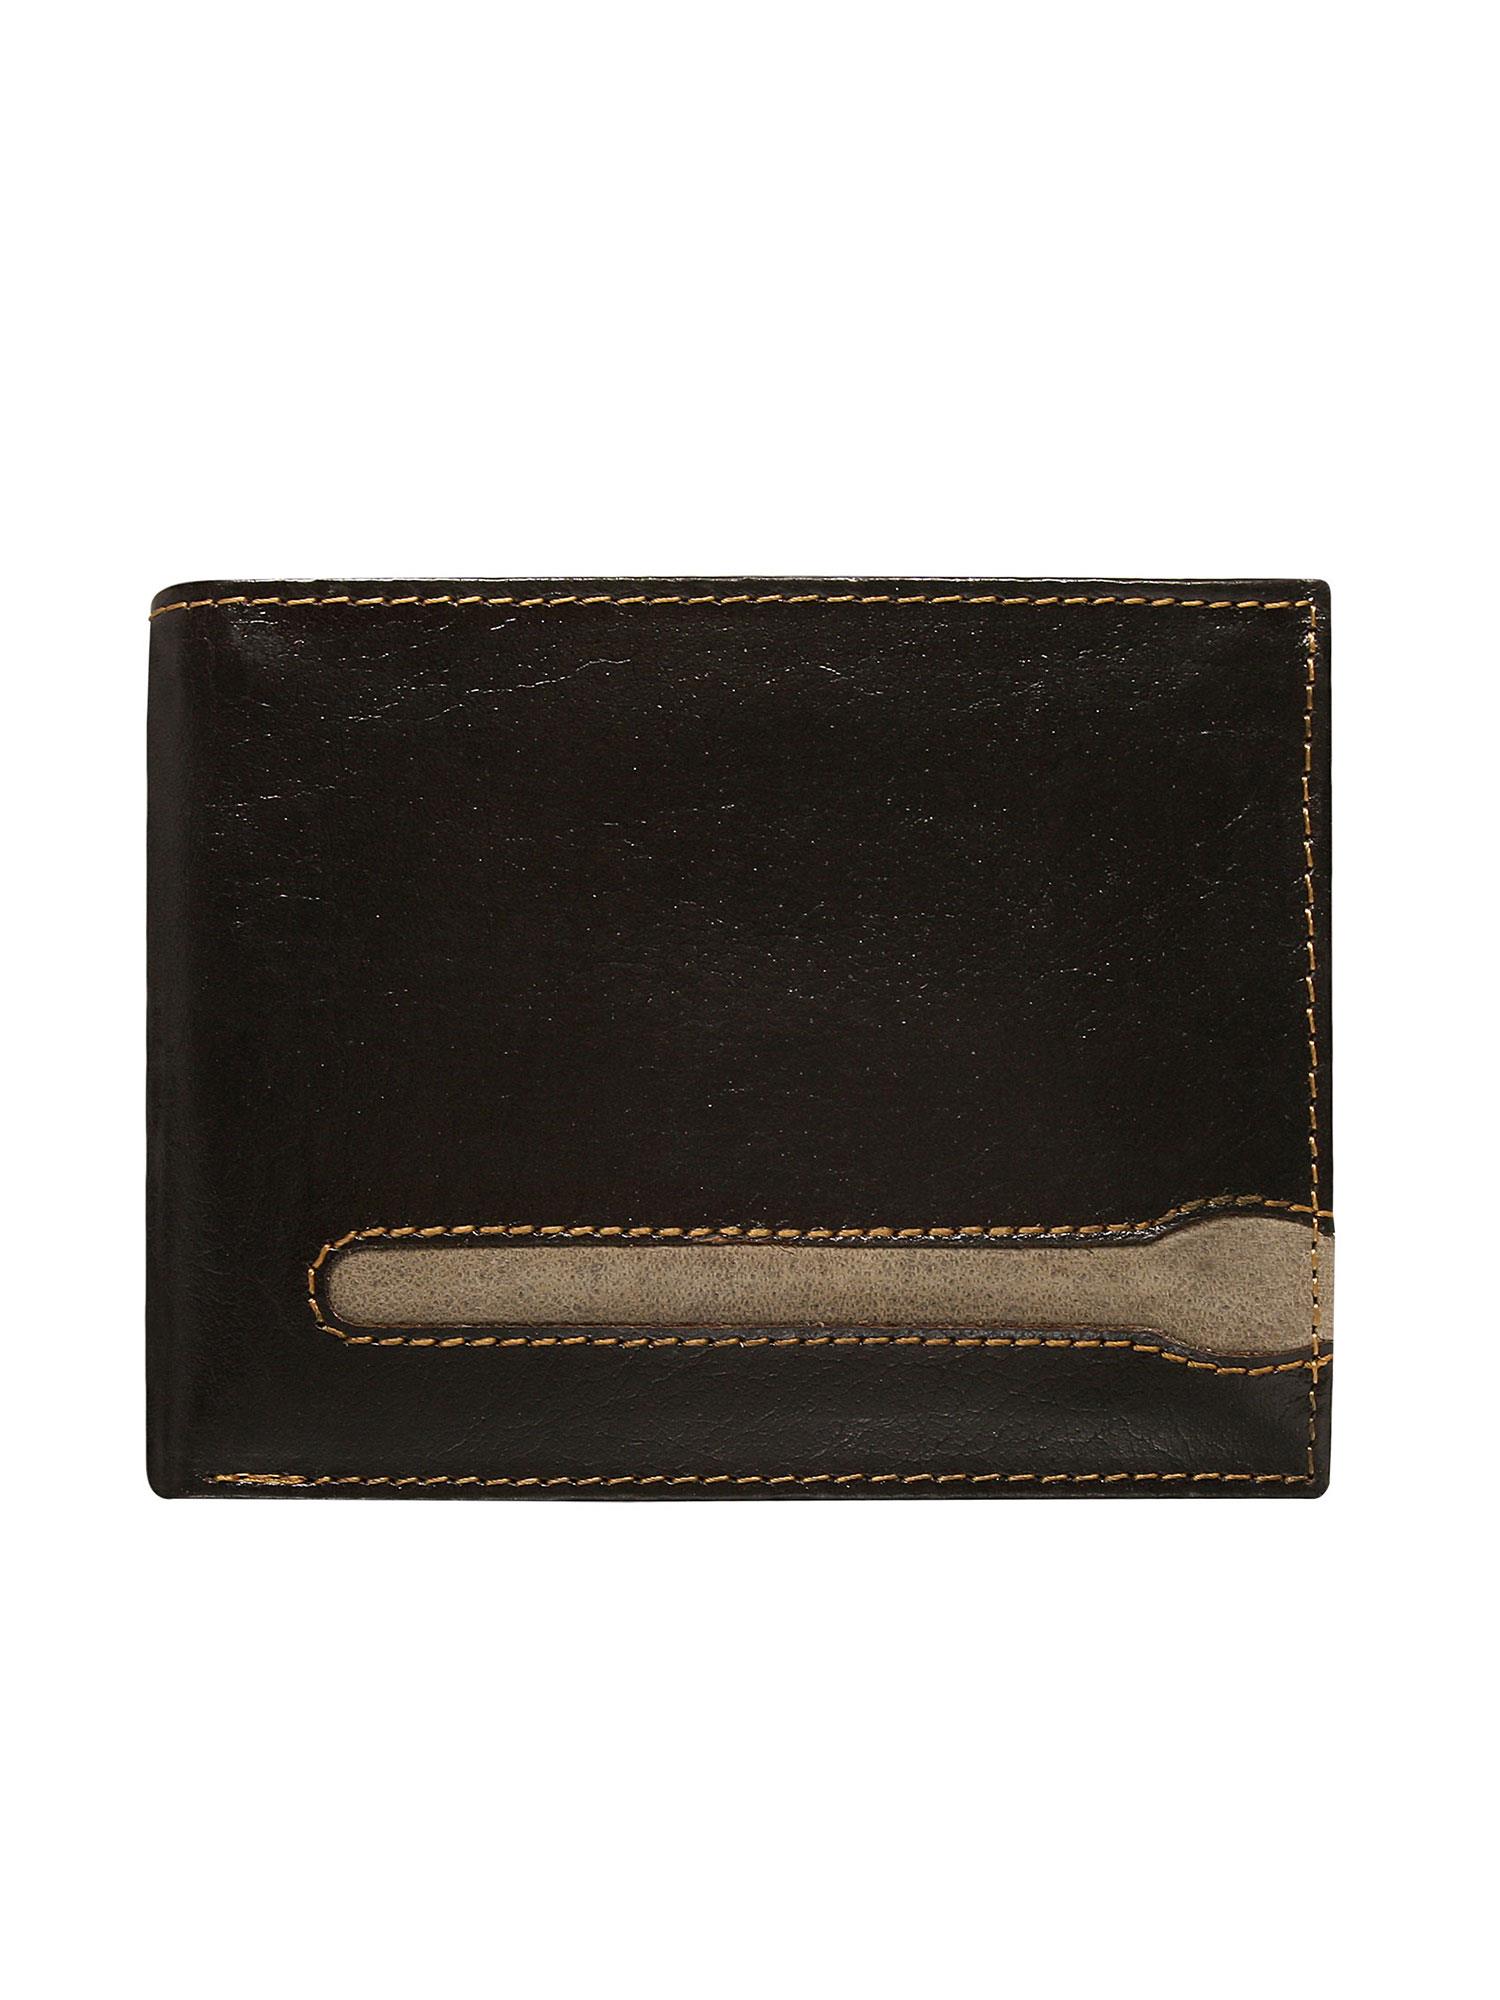 Men's wallet of brown color made of genuine leather